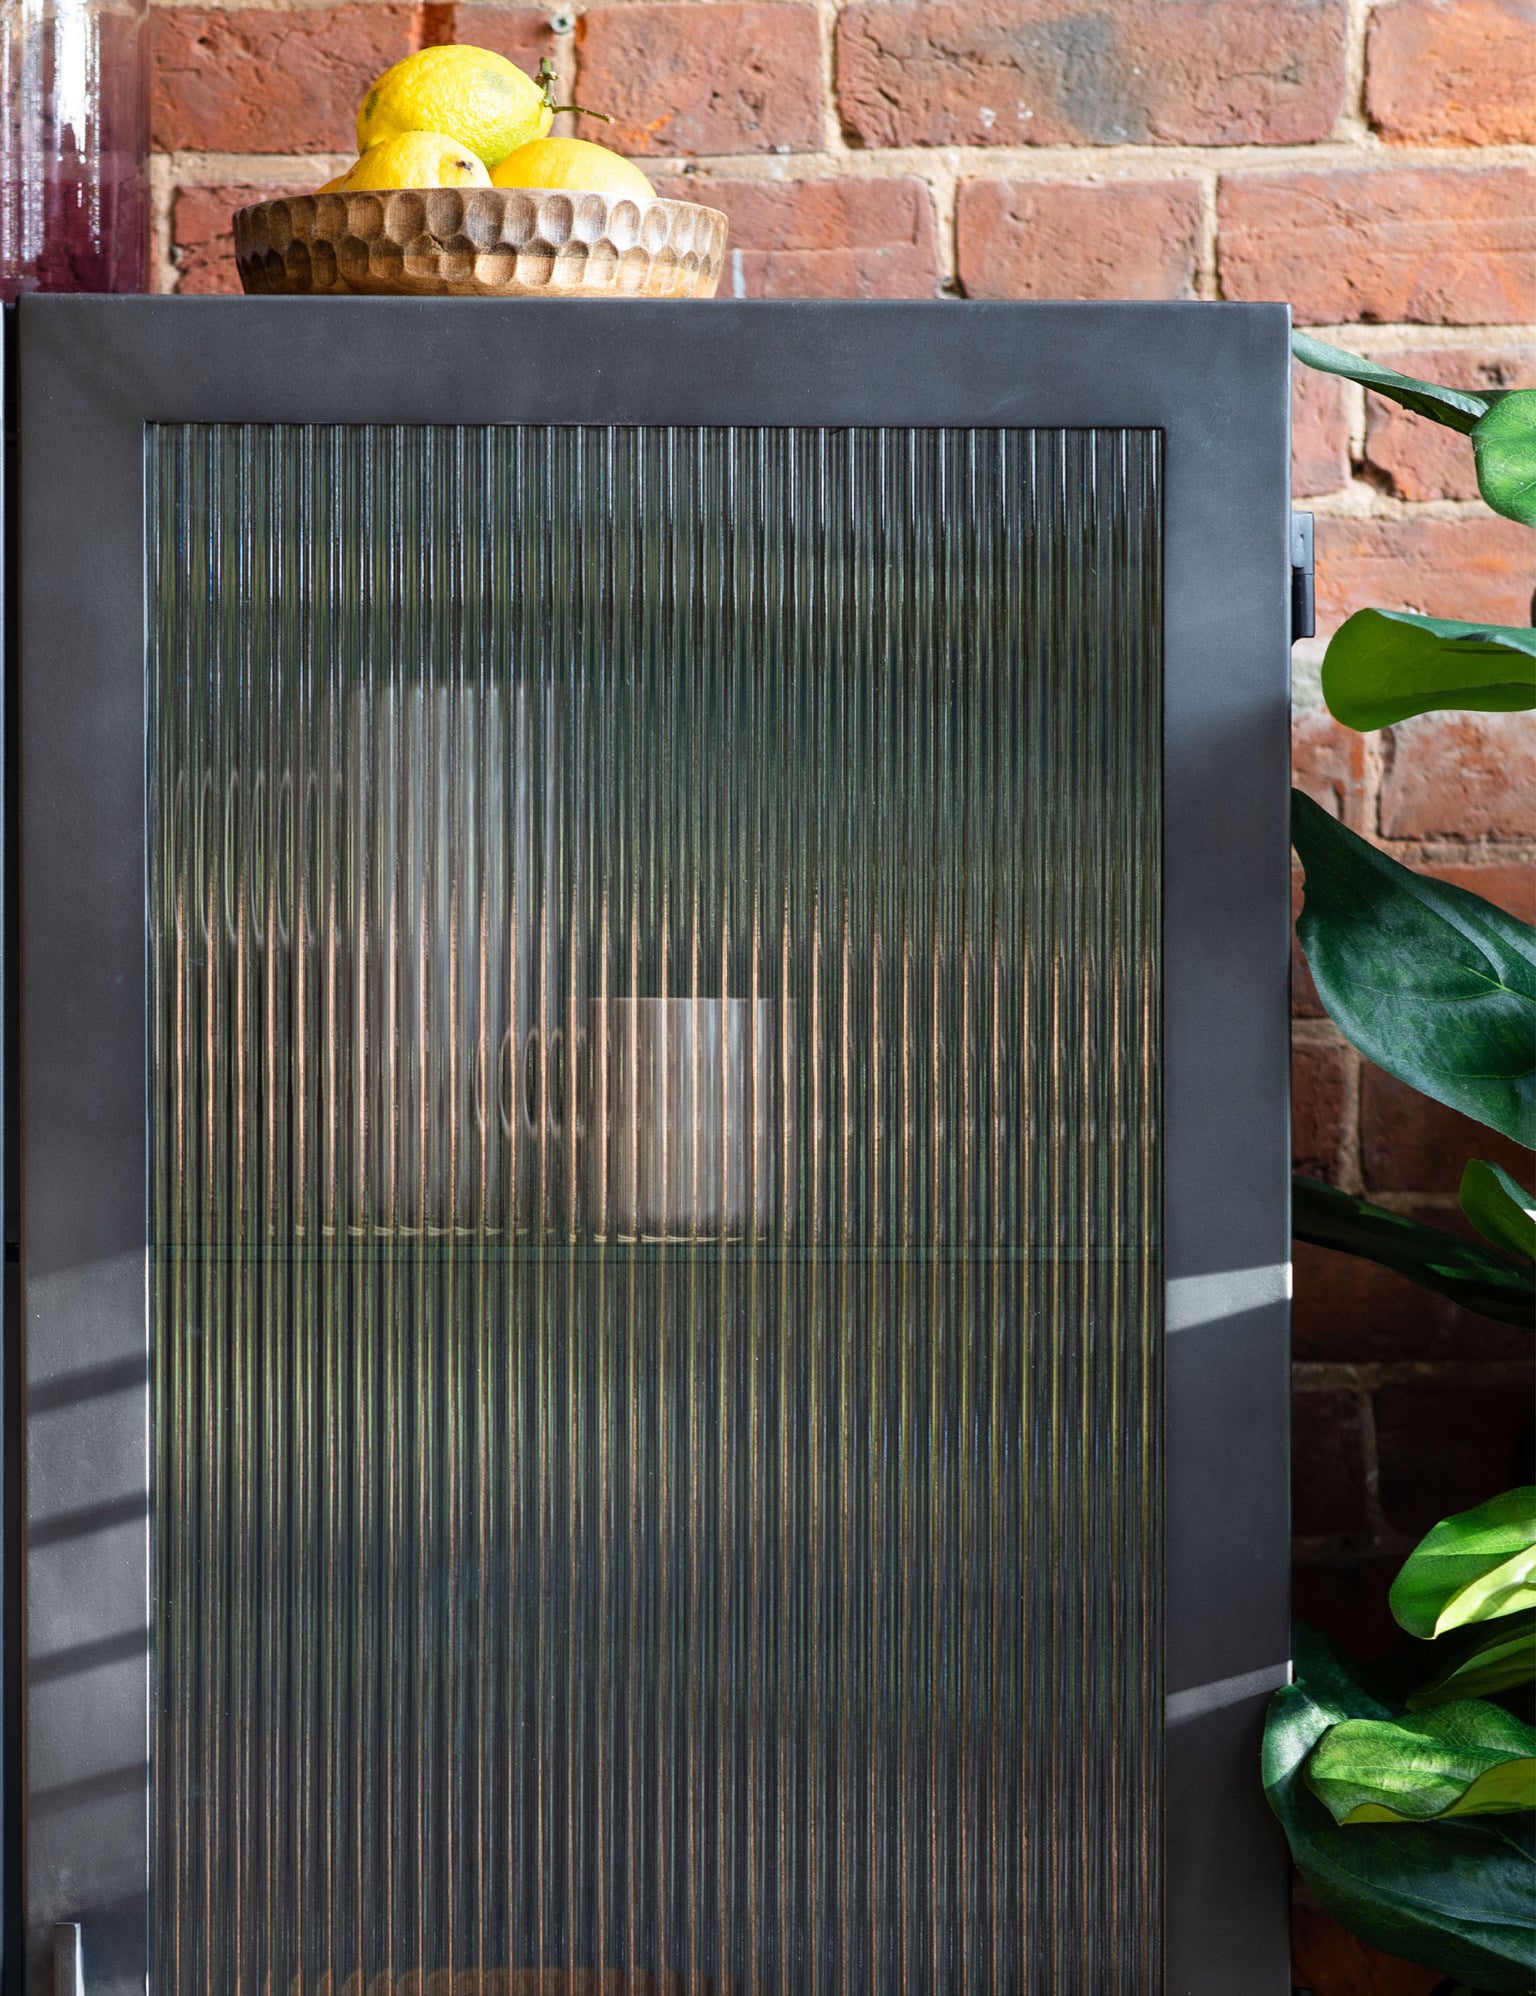 grey metal, glass front cabinet